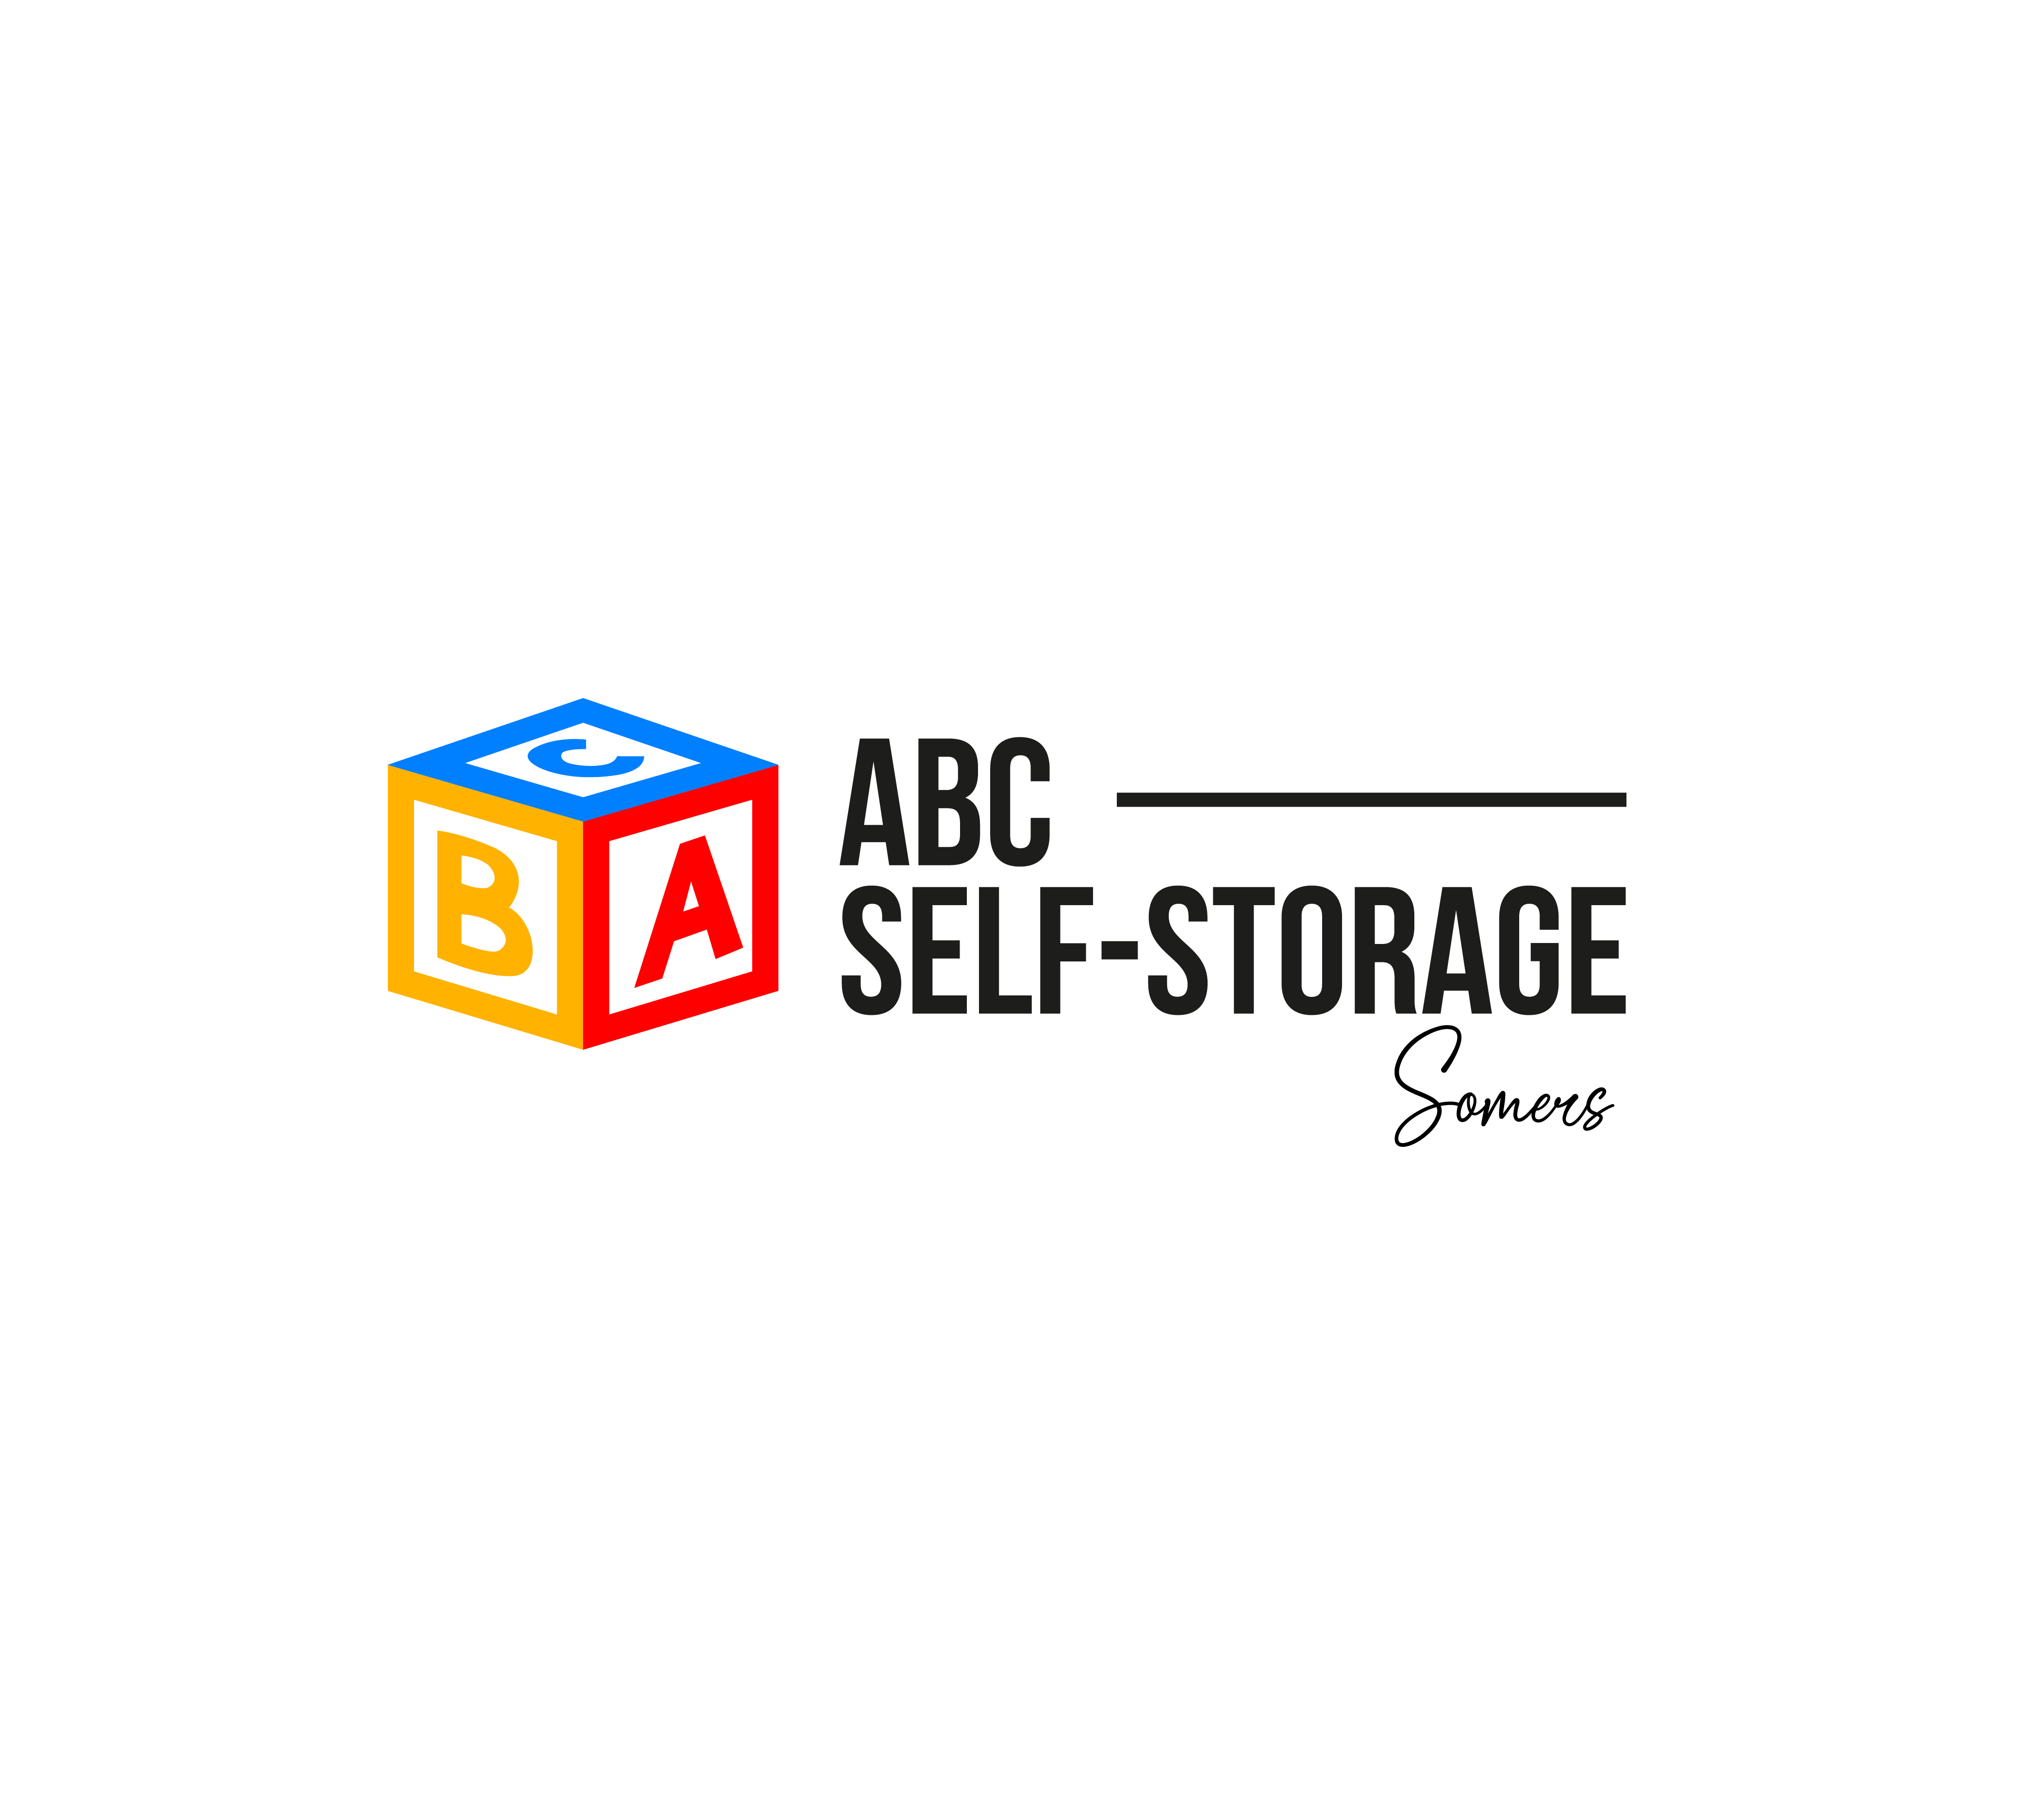 ABC Self Storage in Somers, MT